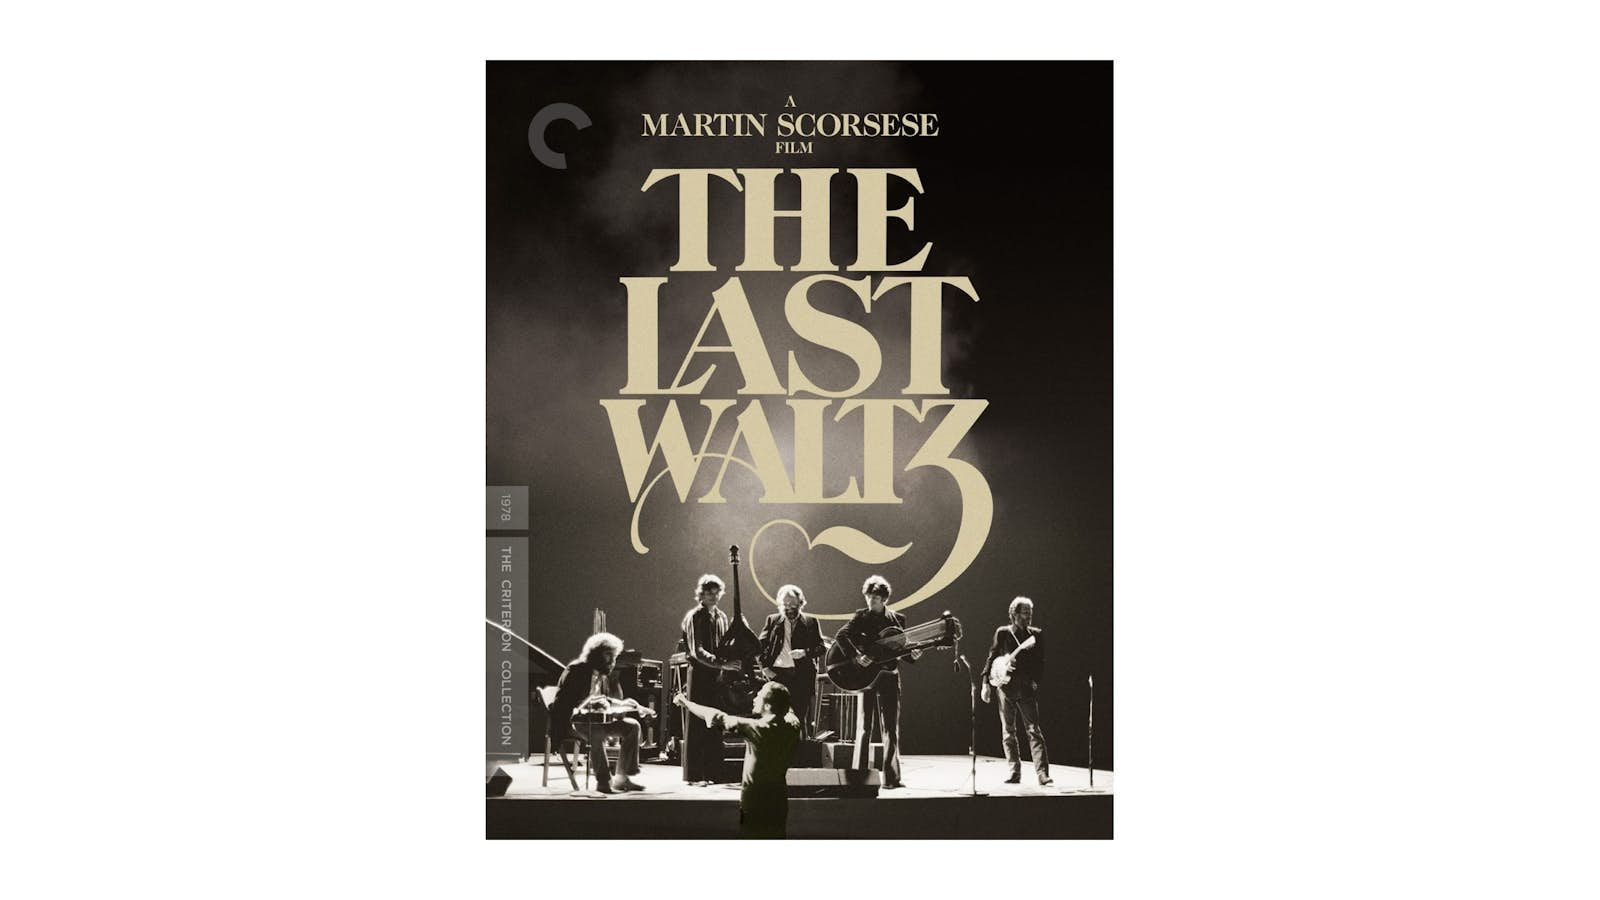 The Last Waltz - Criterion Collection Blu-ray